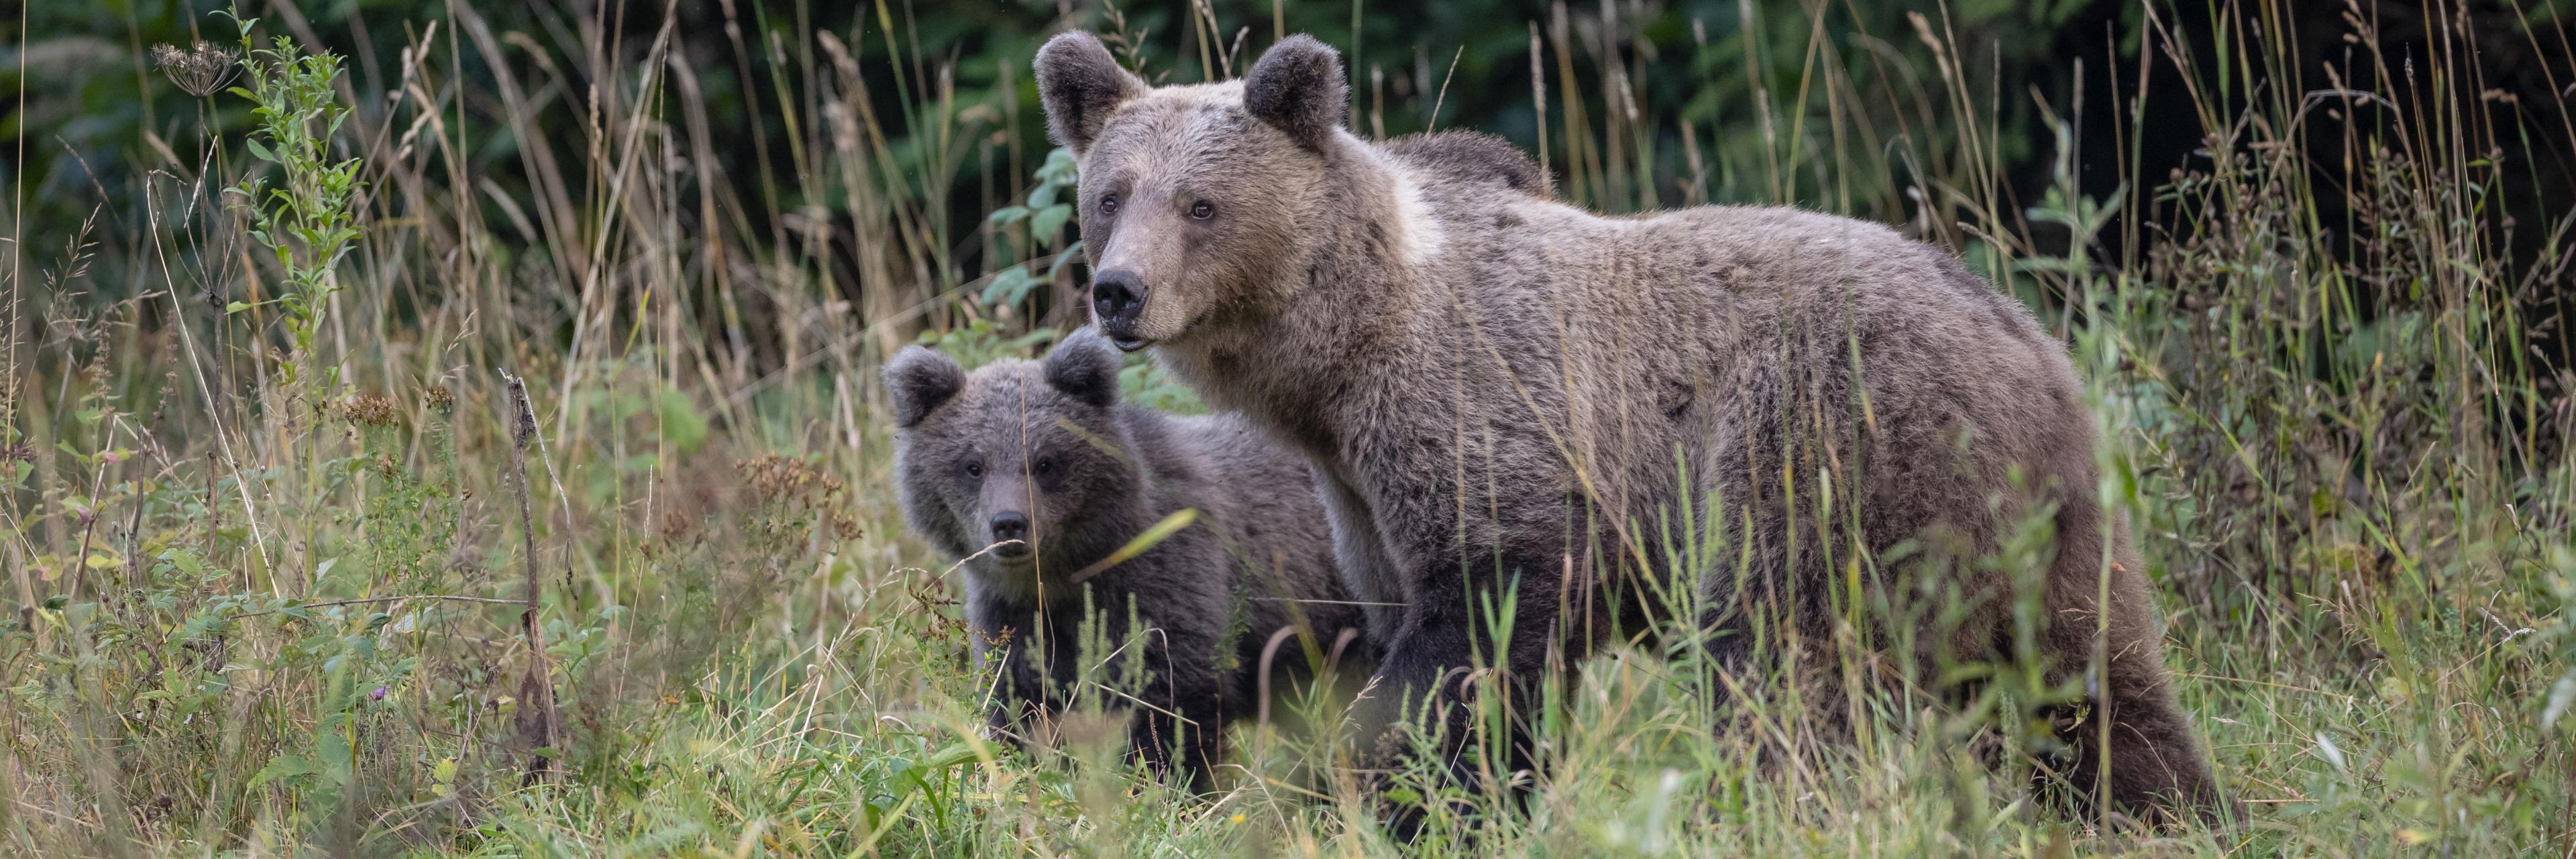 Bear and cub in forest.